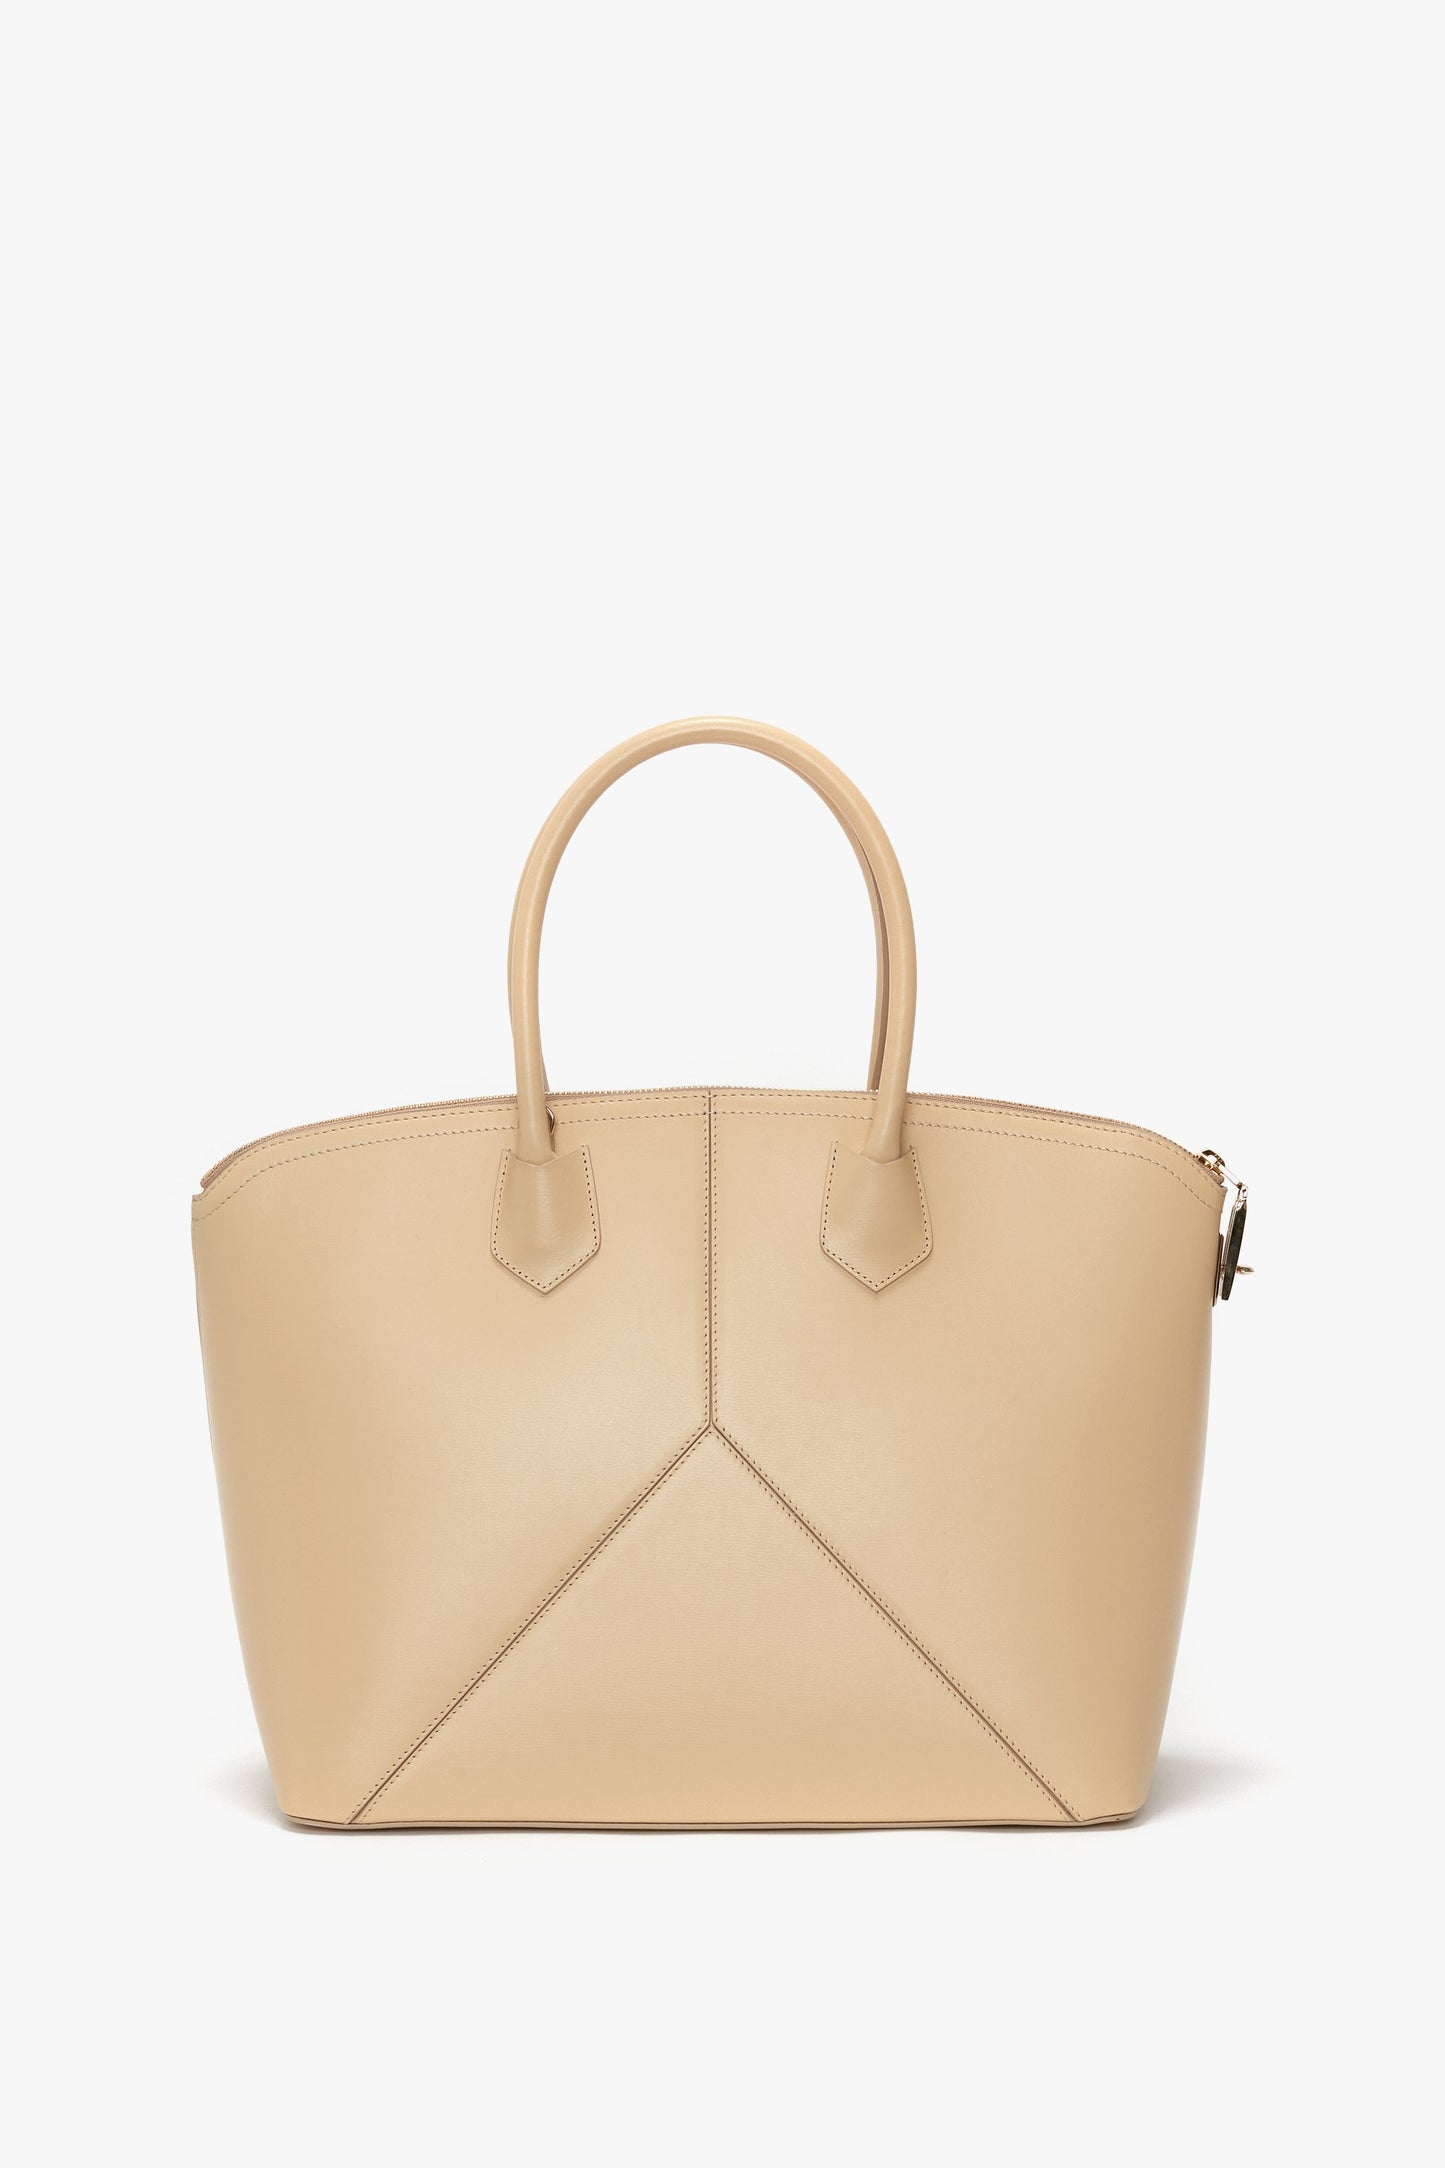 The Victoria Beckham Victoria Bag In Sesame Leather is a beige leather handbag with an arch-shaped top and two handles. It showcases stitched geometric designs on the front and a zipper closure on top, complemented by leather panels. The background is plain white.